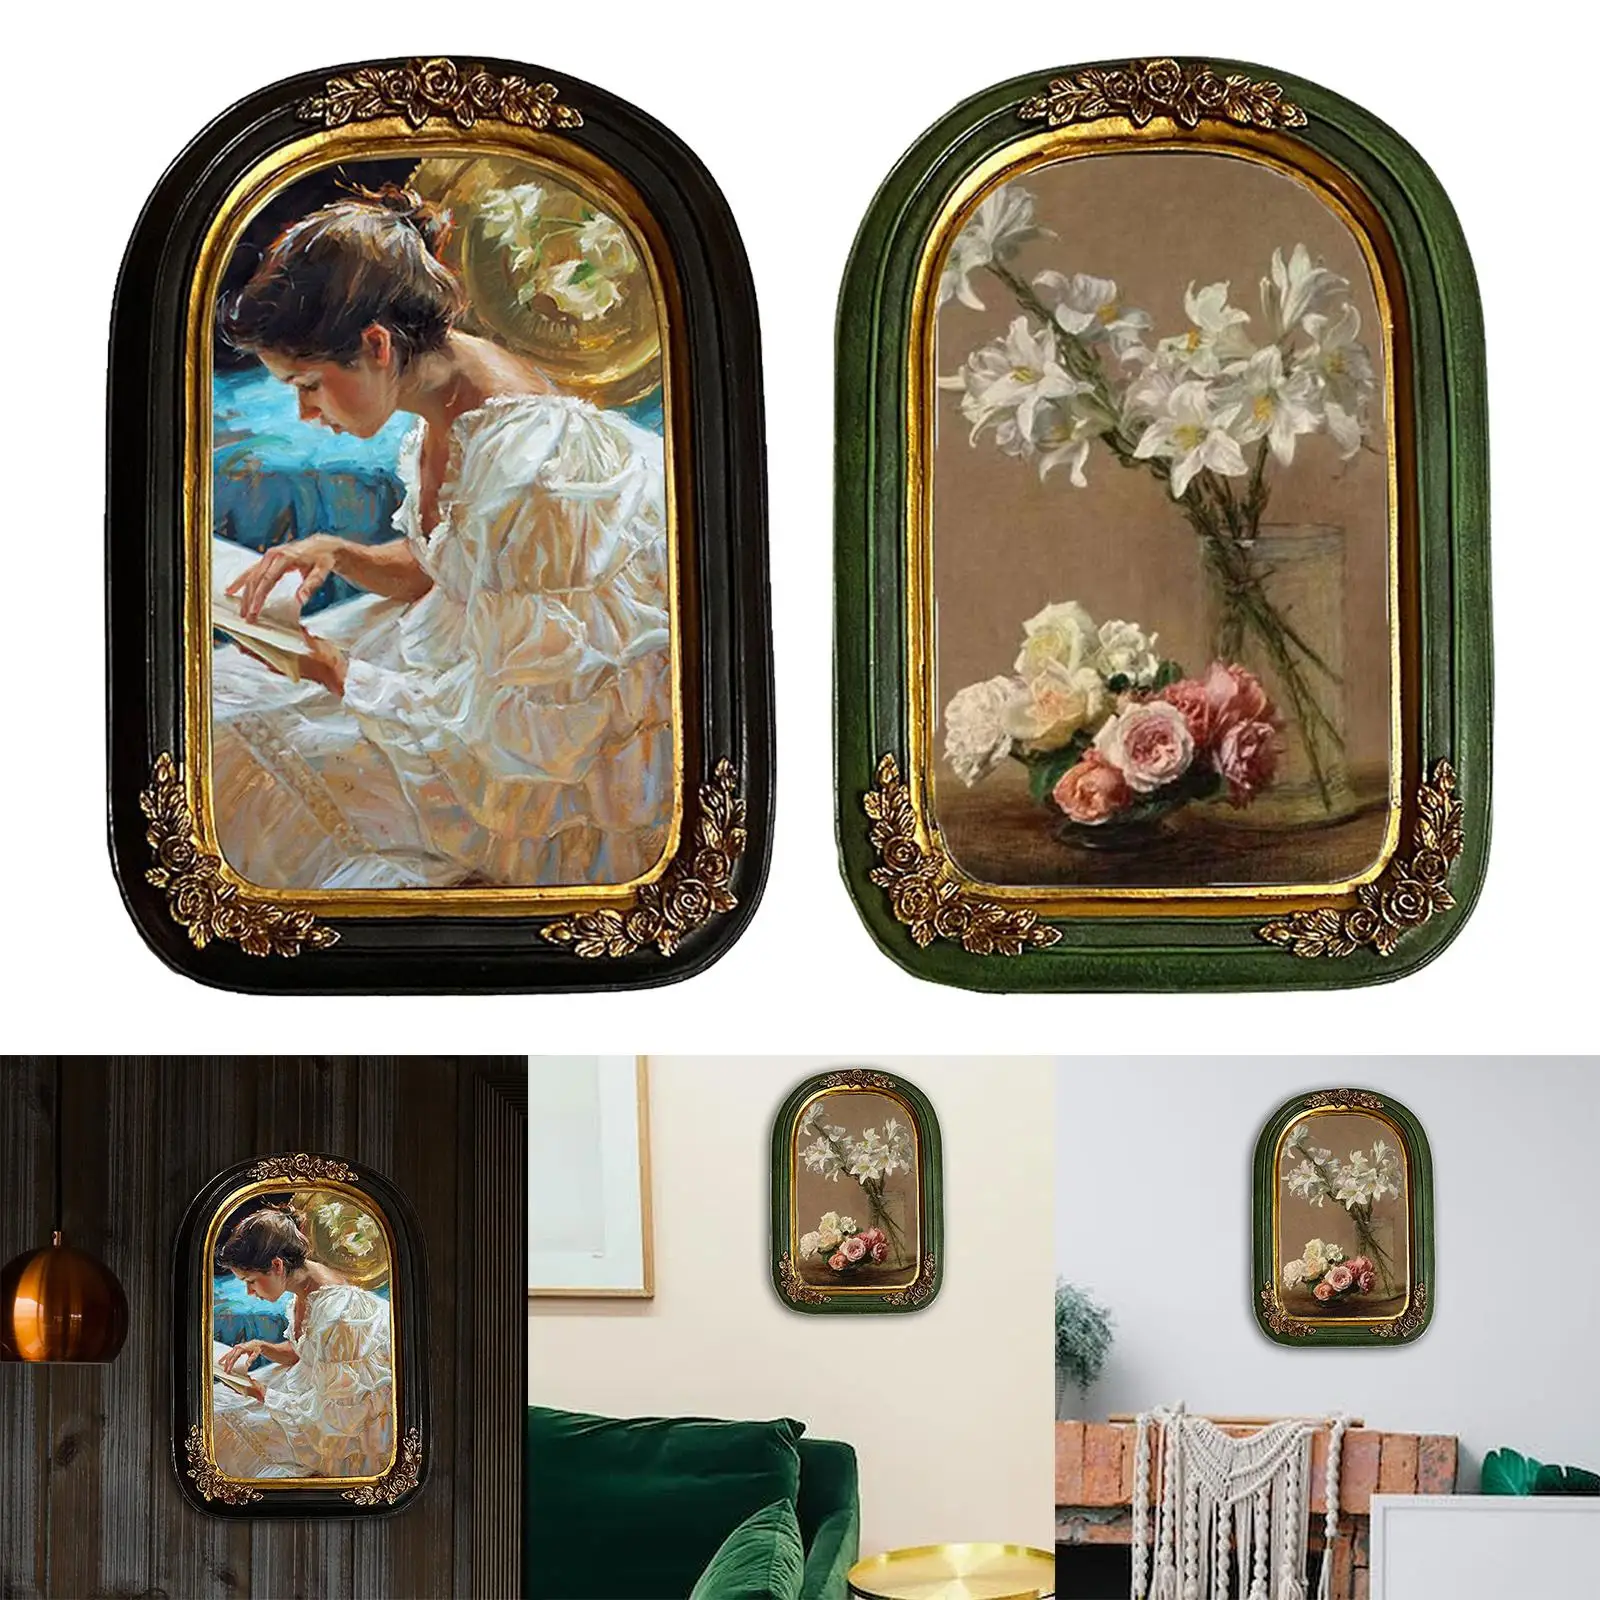 Retro Polyresin Picture Display Frame Wall Hanging Photo Gallery Art Home Decor Inner Frame 13Cmx20cm Decoration Easily Install